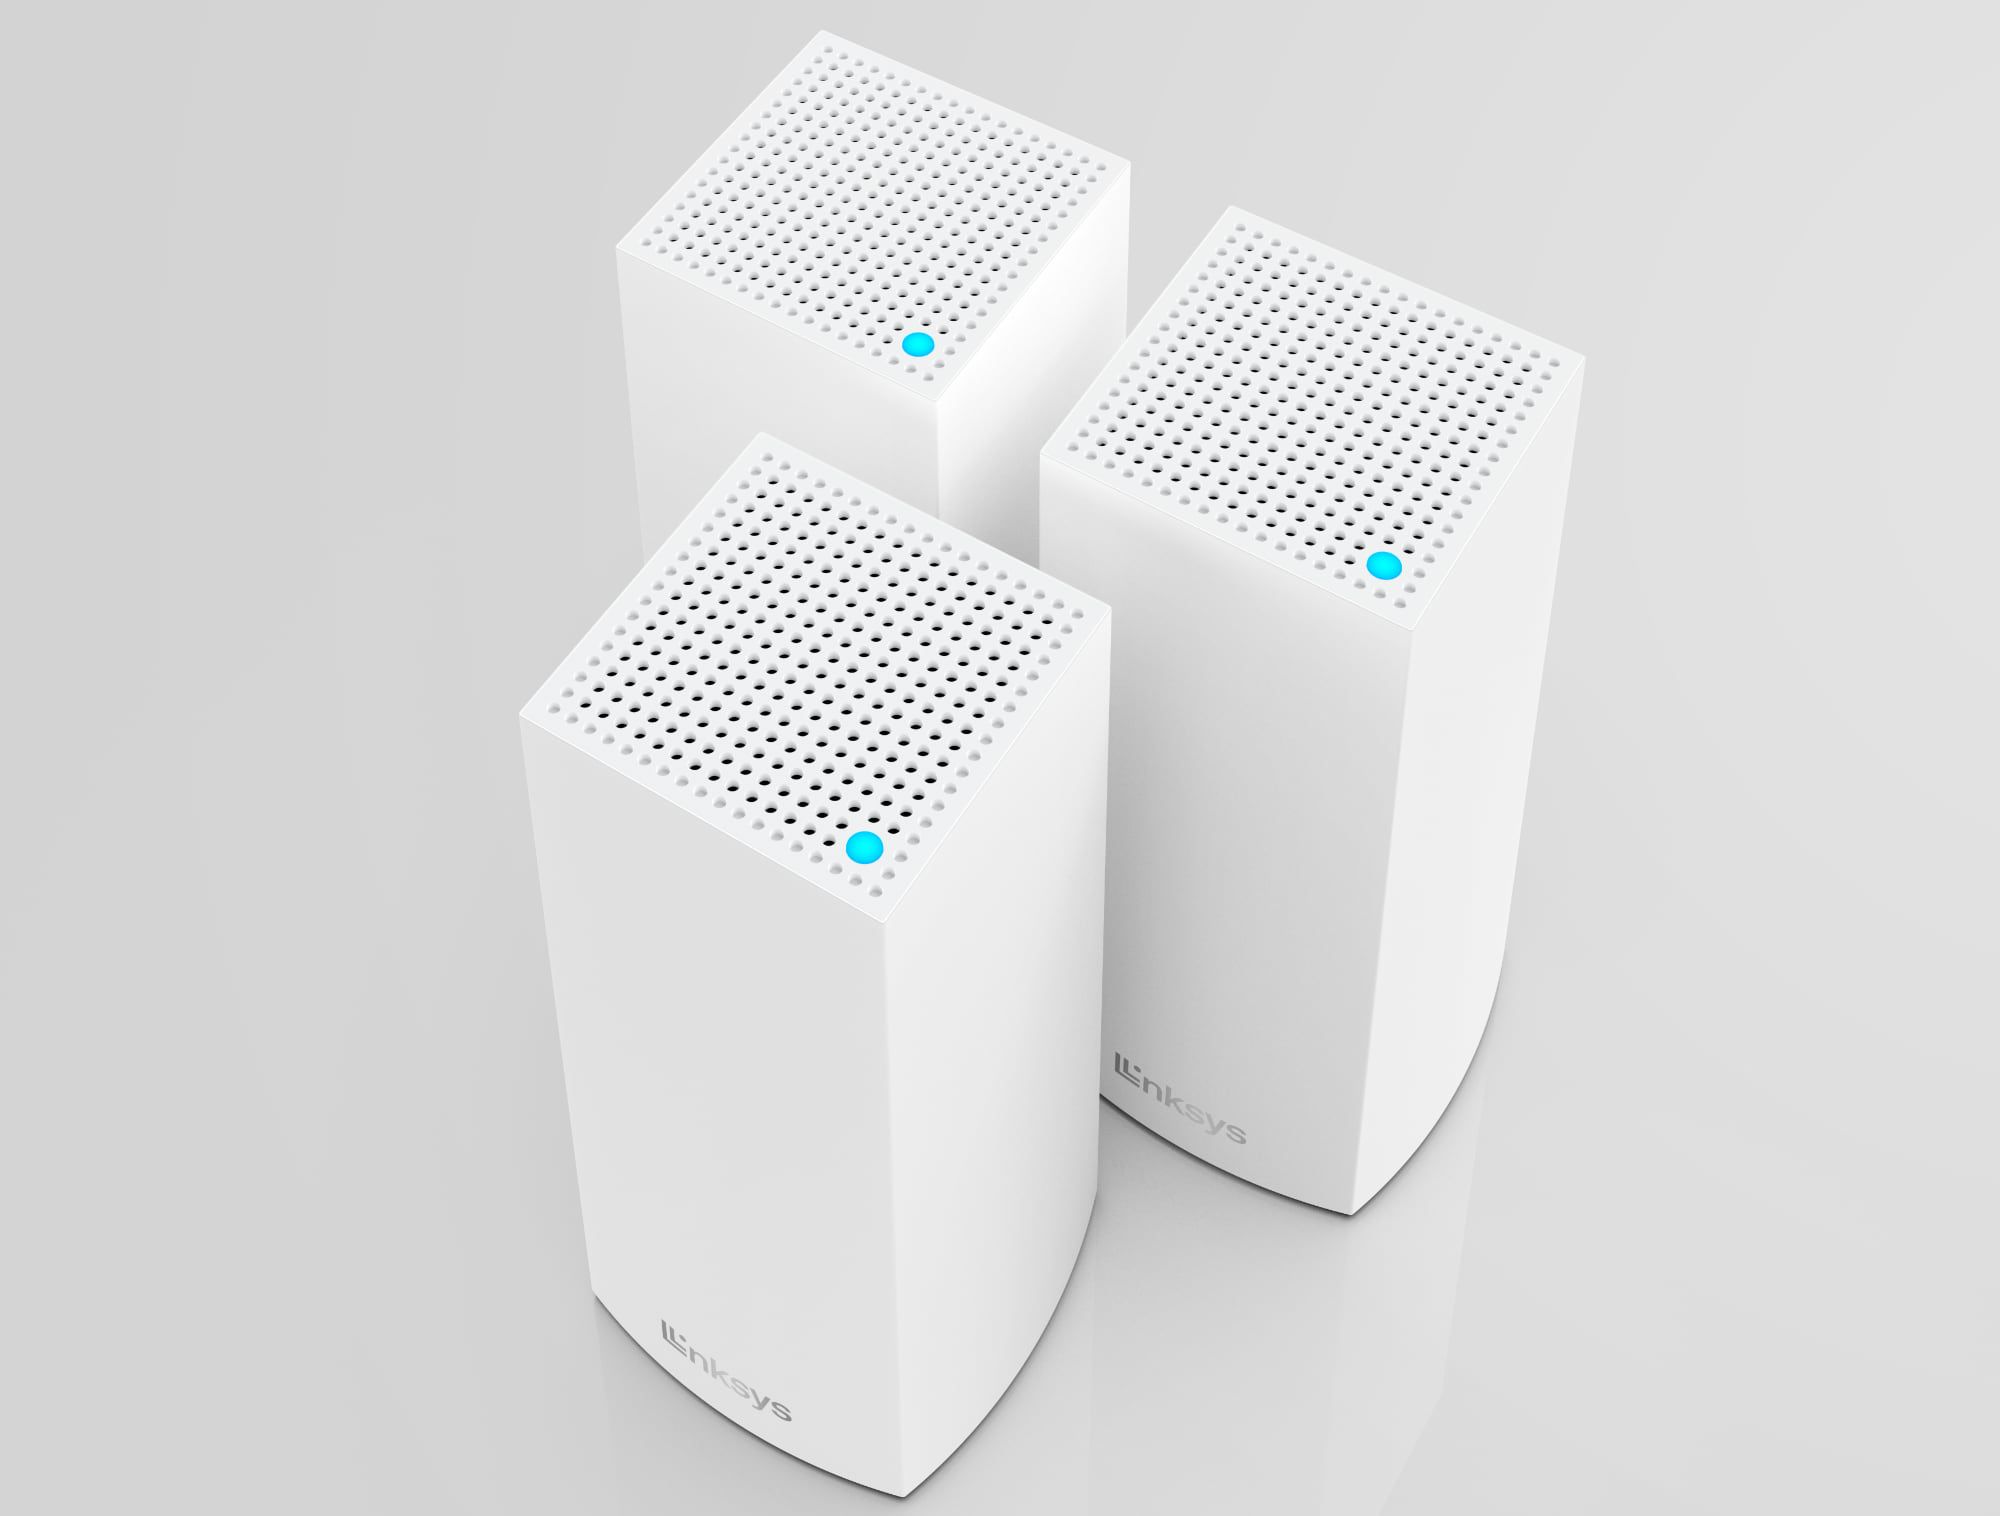 Linksys Launches New Affordable WiFi 6 Mesh System - macrumors.com